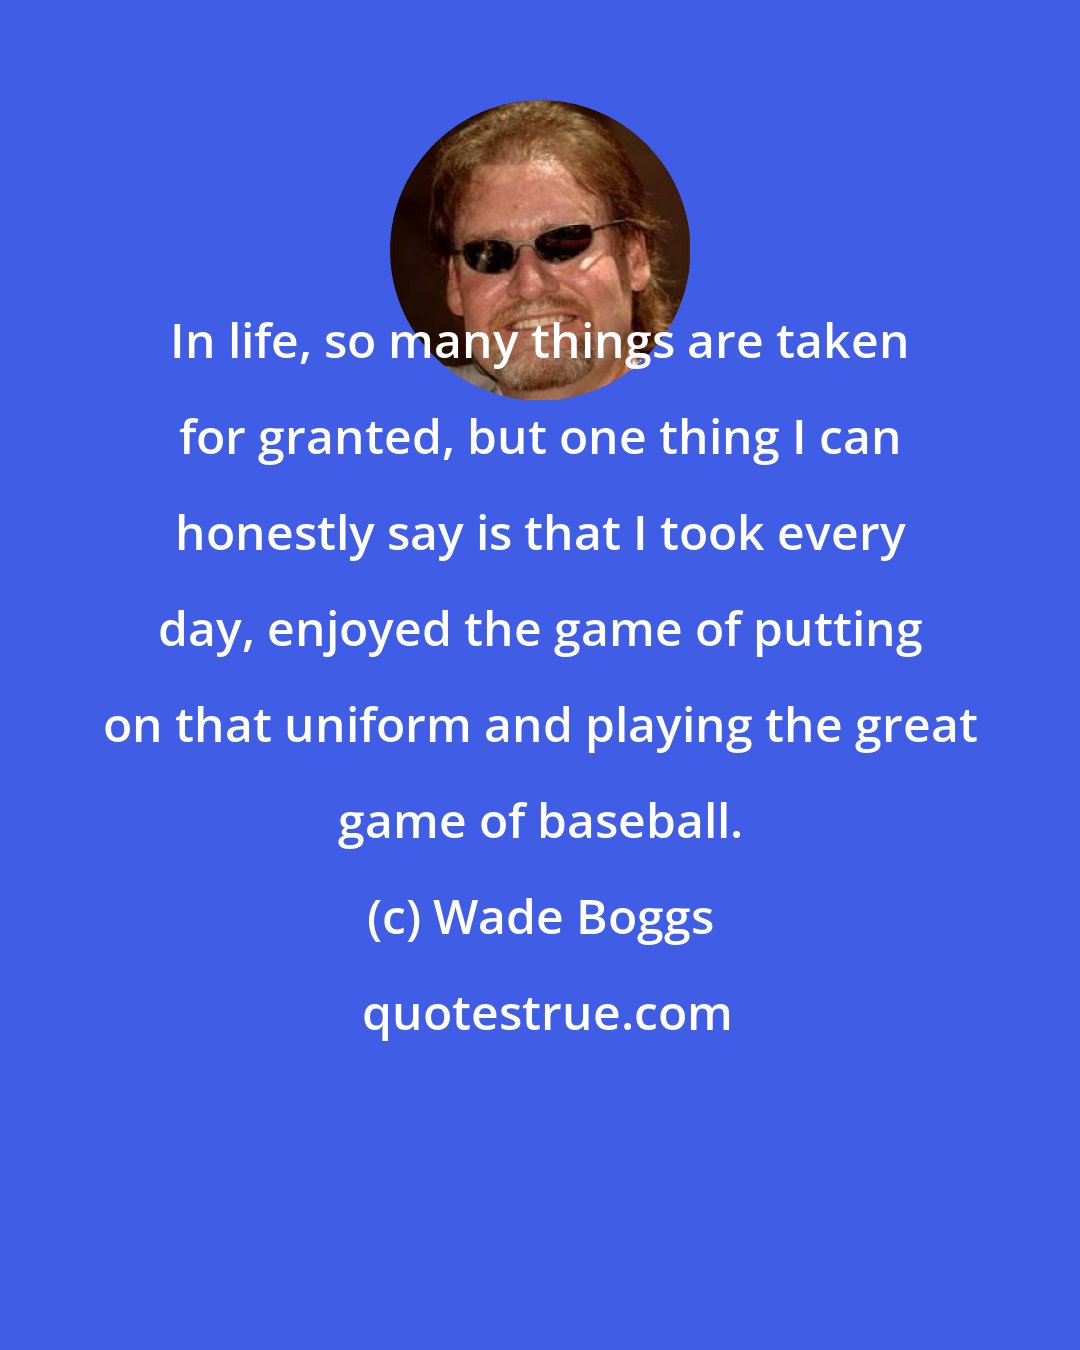 Wade Boggs: In life, so many things are taken for granted, but one thing I can honestly say is that I took every day, enjoyed the game of putting on that uniform and playing the great game of baseball.